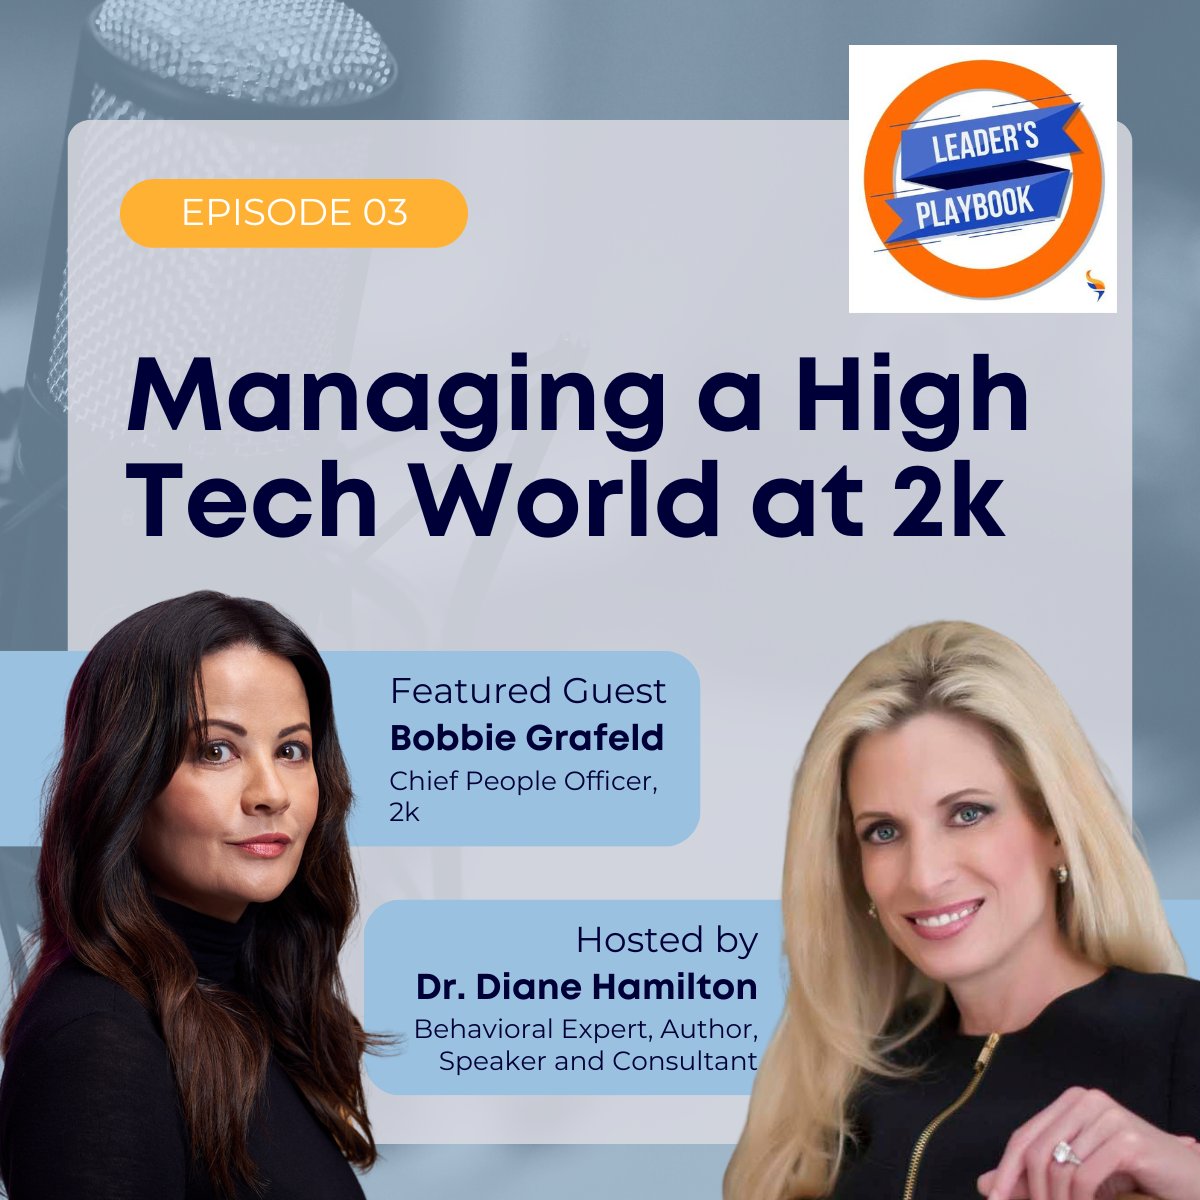 We just dropped a new episode of our podcast, Leader's Playbook! Listen in to hear Dr. Diane Hamilton ask 2K's Chief People Officer, Bobbie Grafeld, about the HR challenges she's faced in the tech world.

Listen here: ow.ly/cxrE50MhBk3

#hrchallenges #hrtips #podcasts